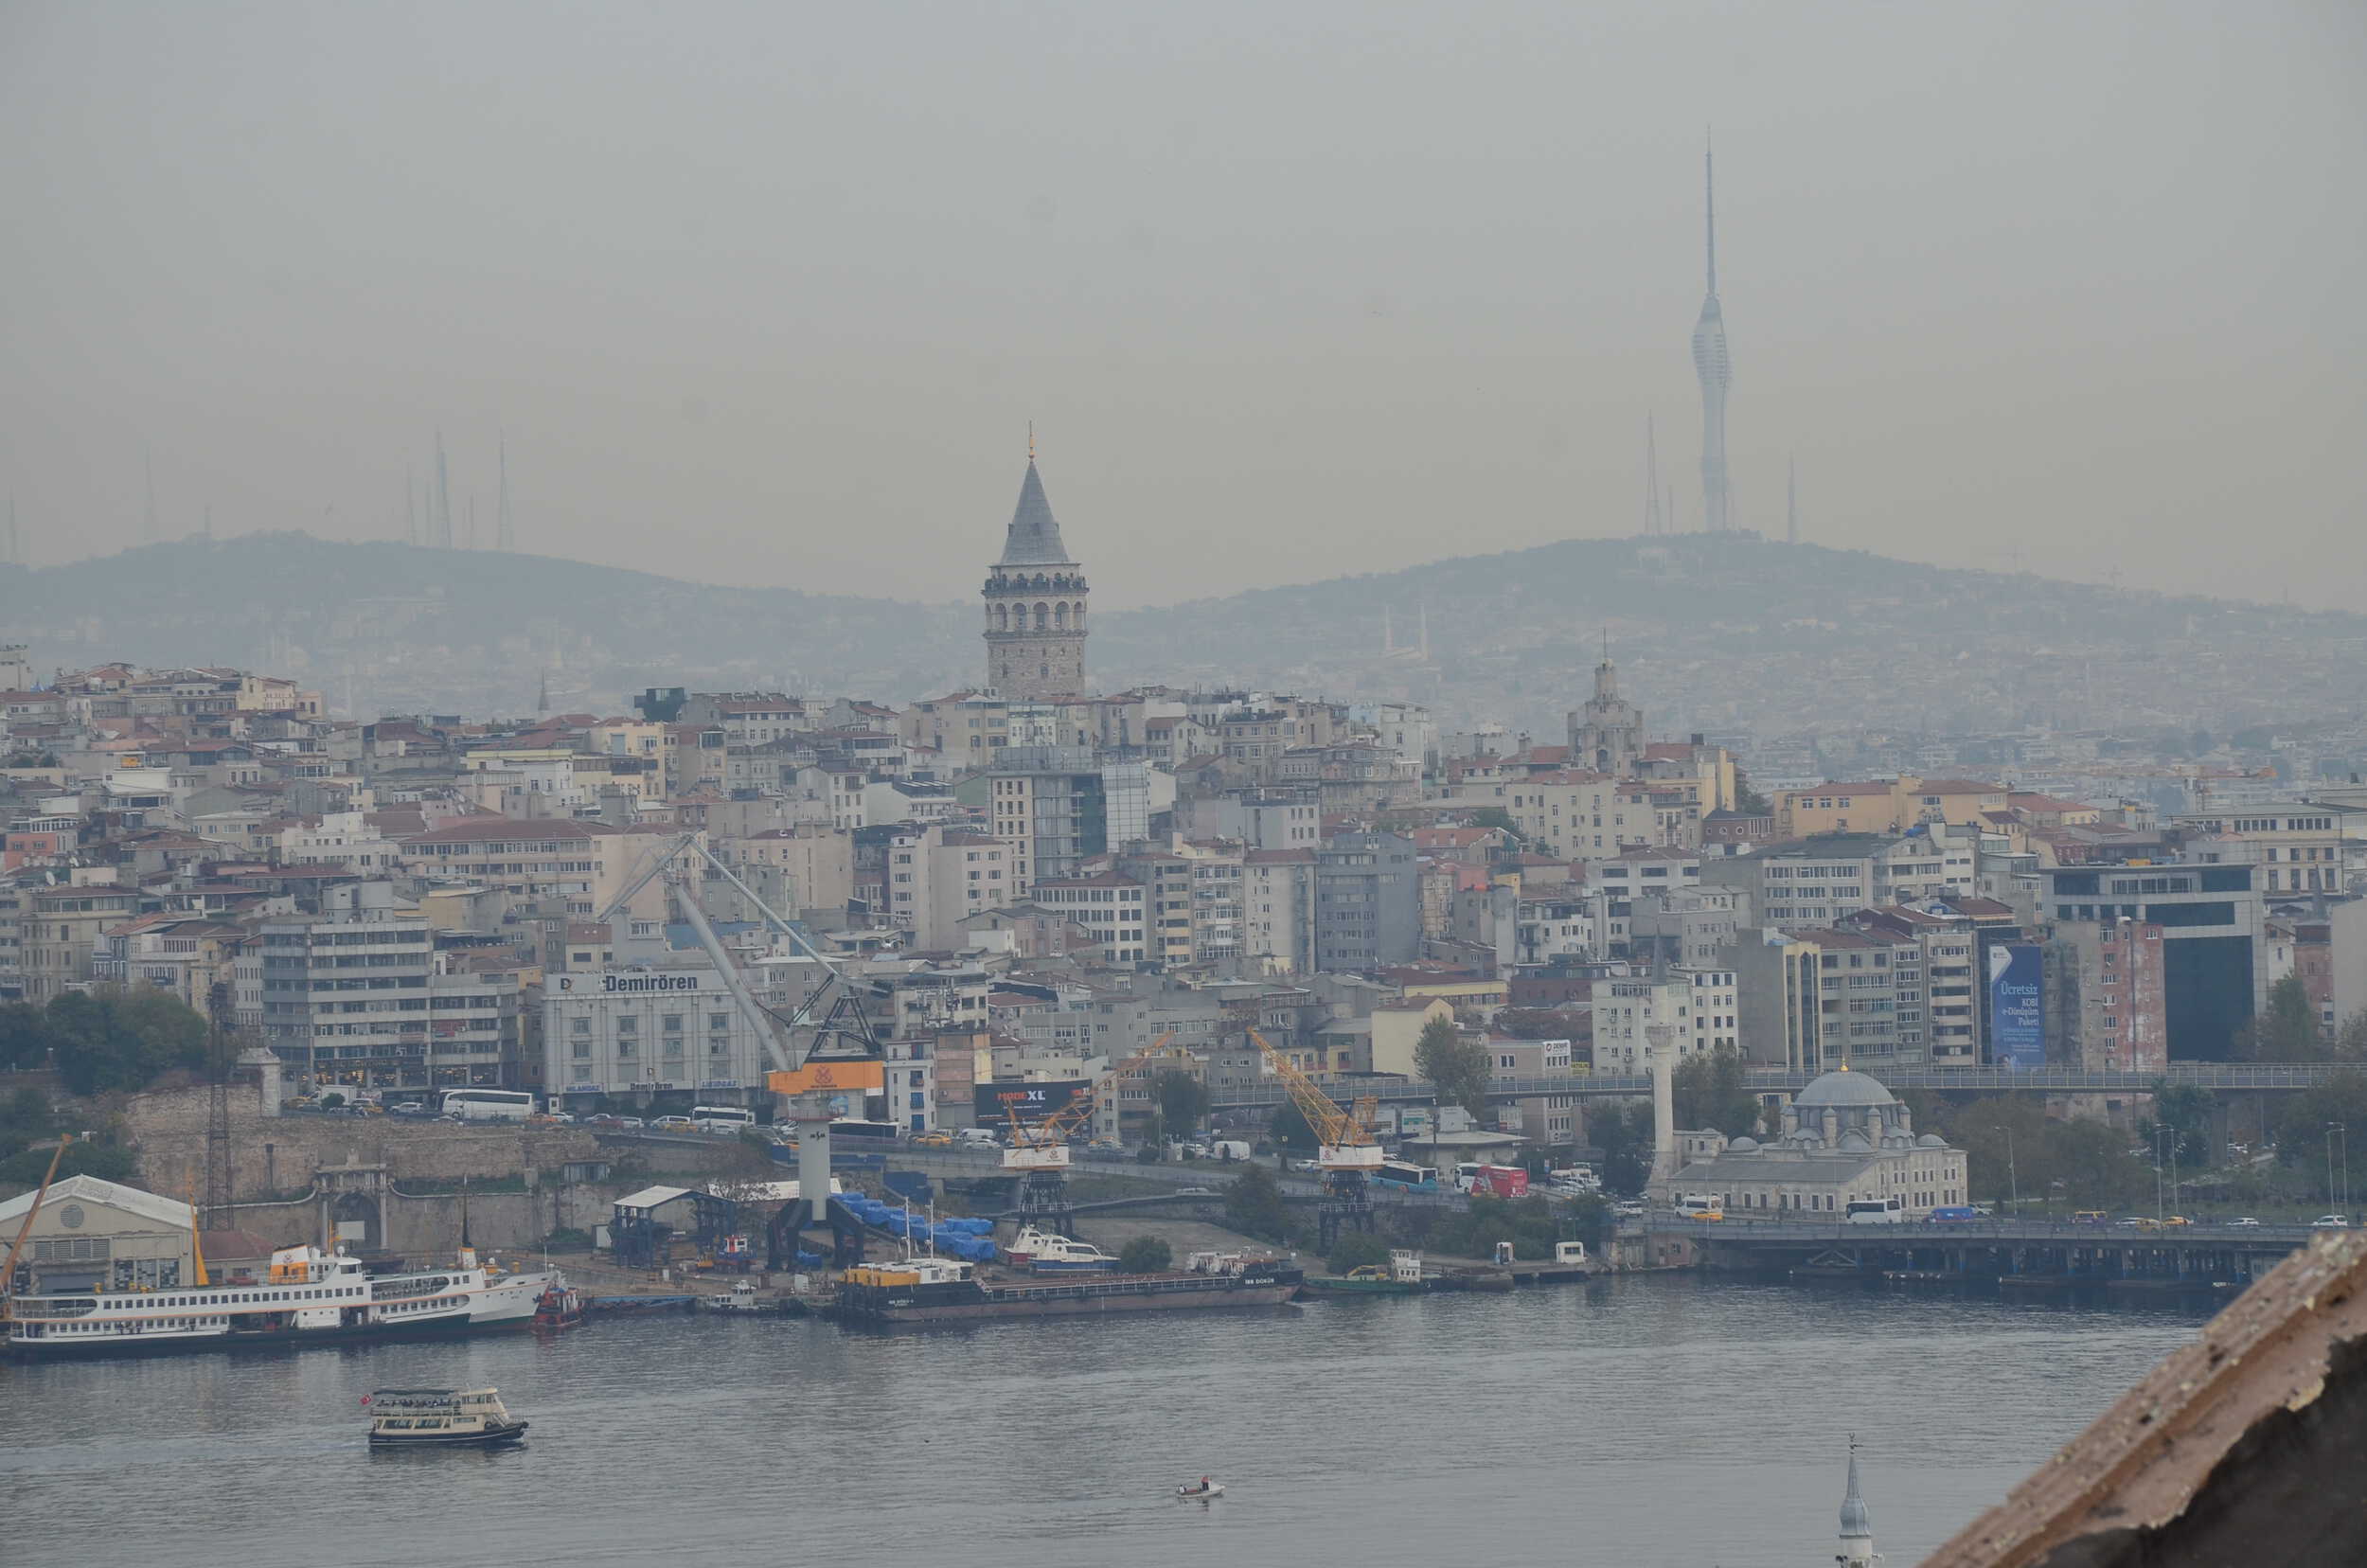 Looking towards the Galata Tower